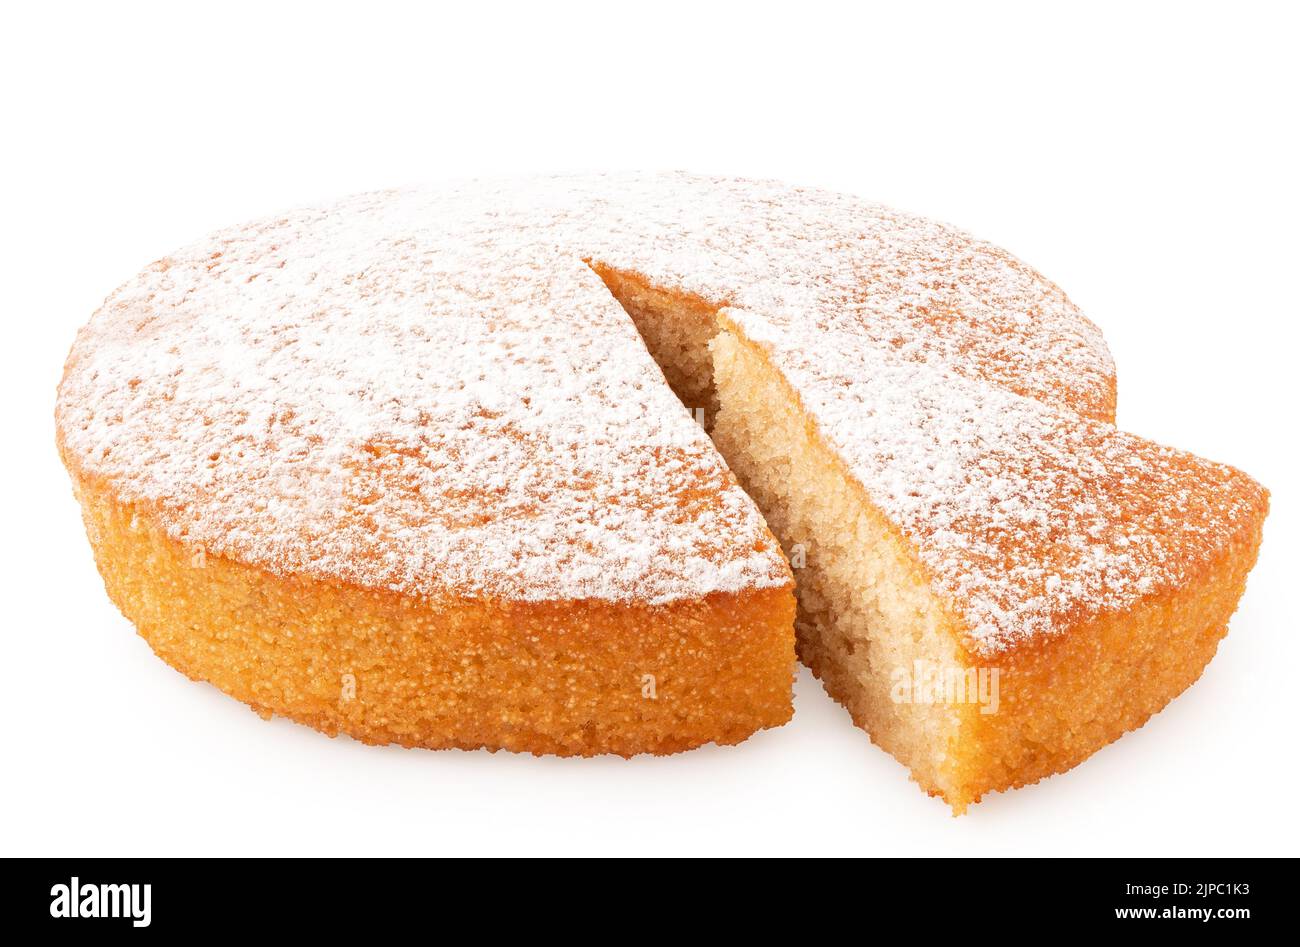 Whole lemon sponge cake with icing sugar topping and cut out wedge isolated on white. Stock Photo